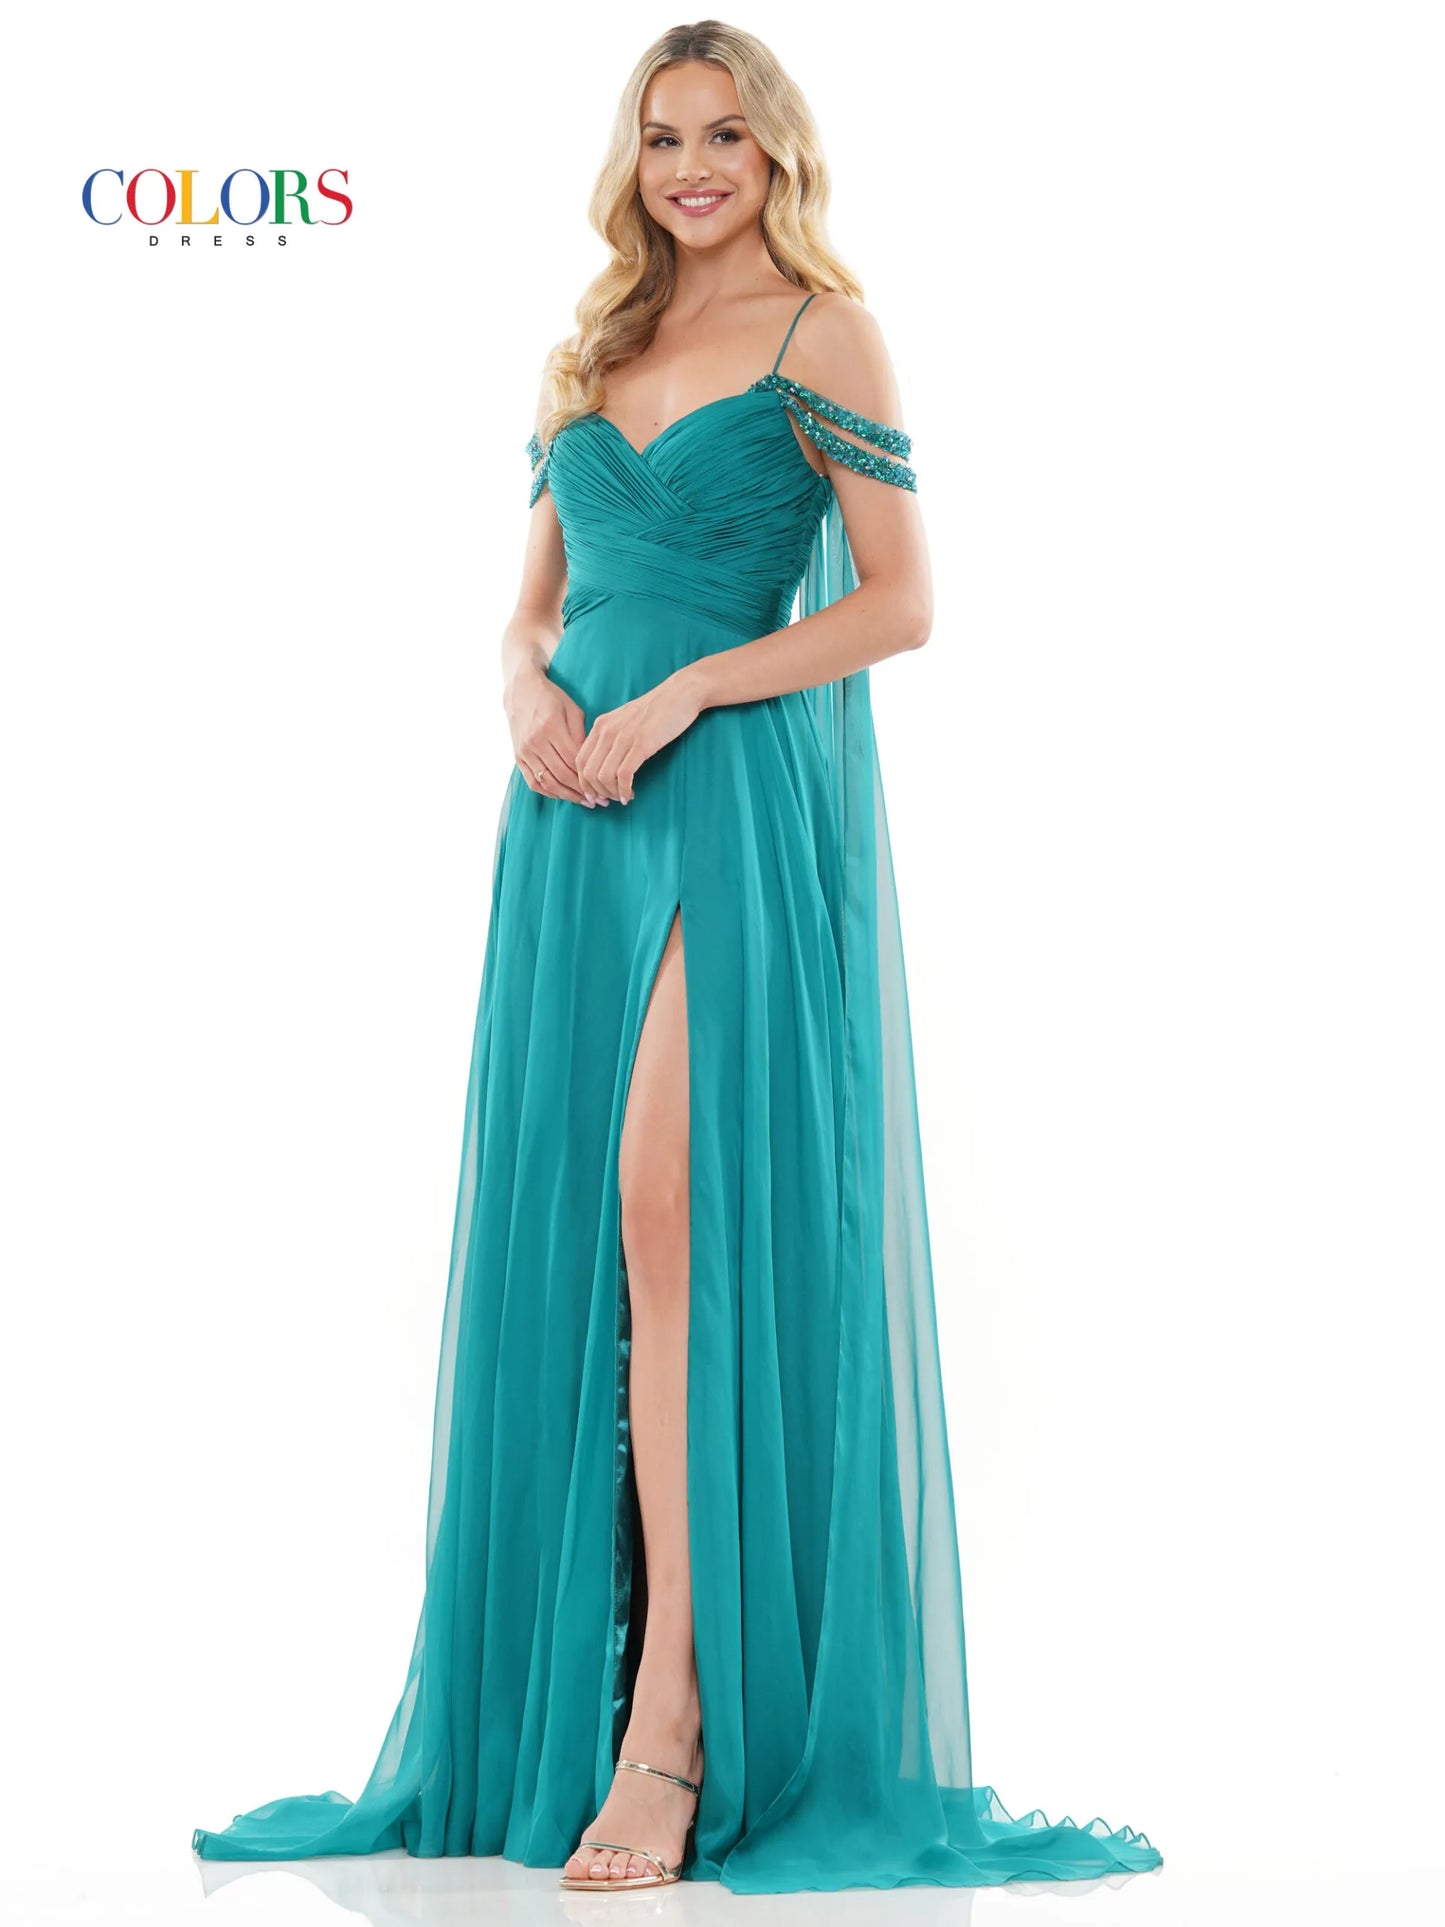 Elevate your style with the Colors Dress 3101 A Line Chiffon Pageant Dress. This stunning gown features an off the shoulder design and double beaded straps for a touch of elegance. The flowing chiffon cape adds a dramatic flair, while the maxi slit showcases your legs. Perfect for prom or any special occasion. corset back   Sizes: 0-20  Colors: Black, Royal, Deep Green, Hot Pink, Wine